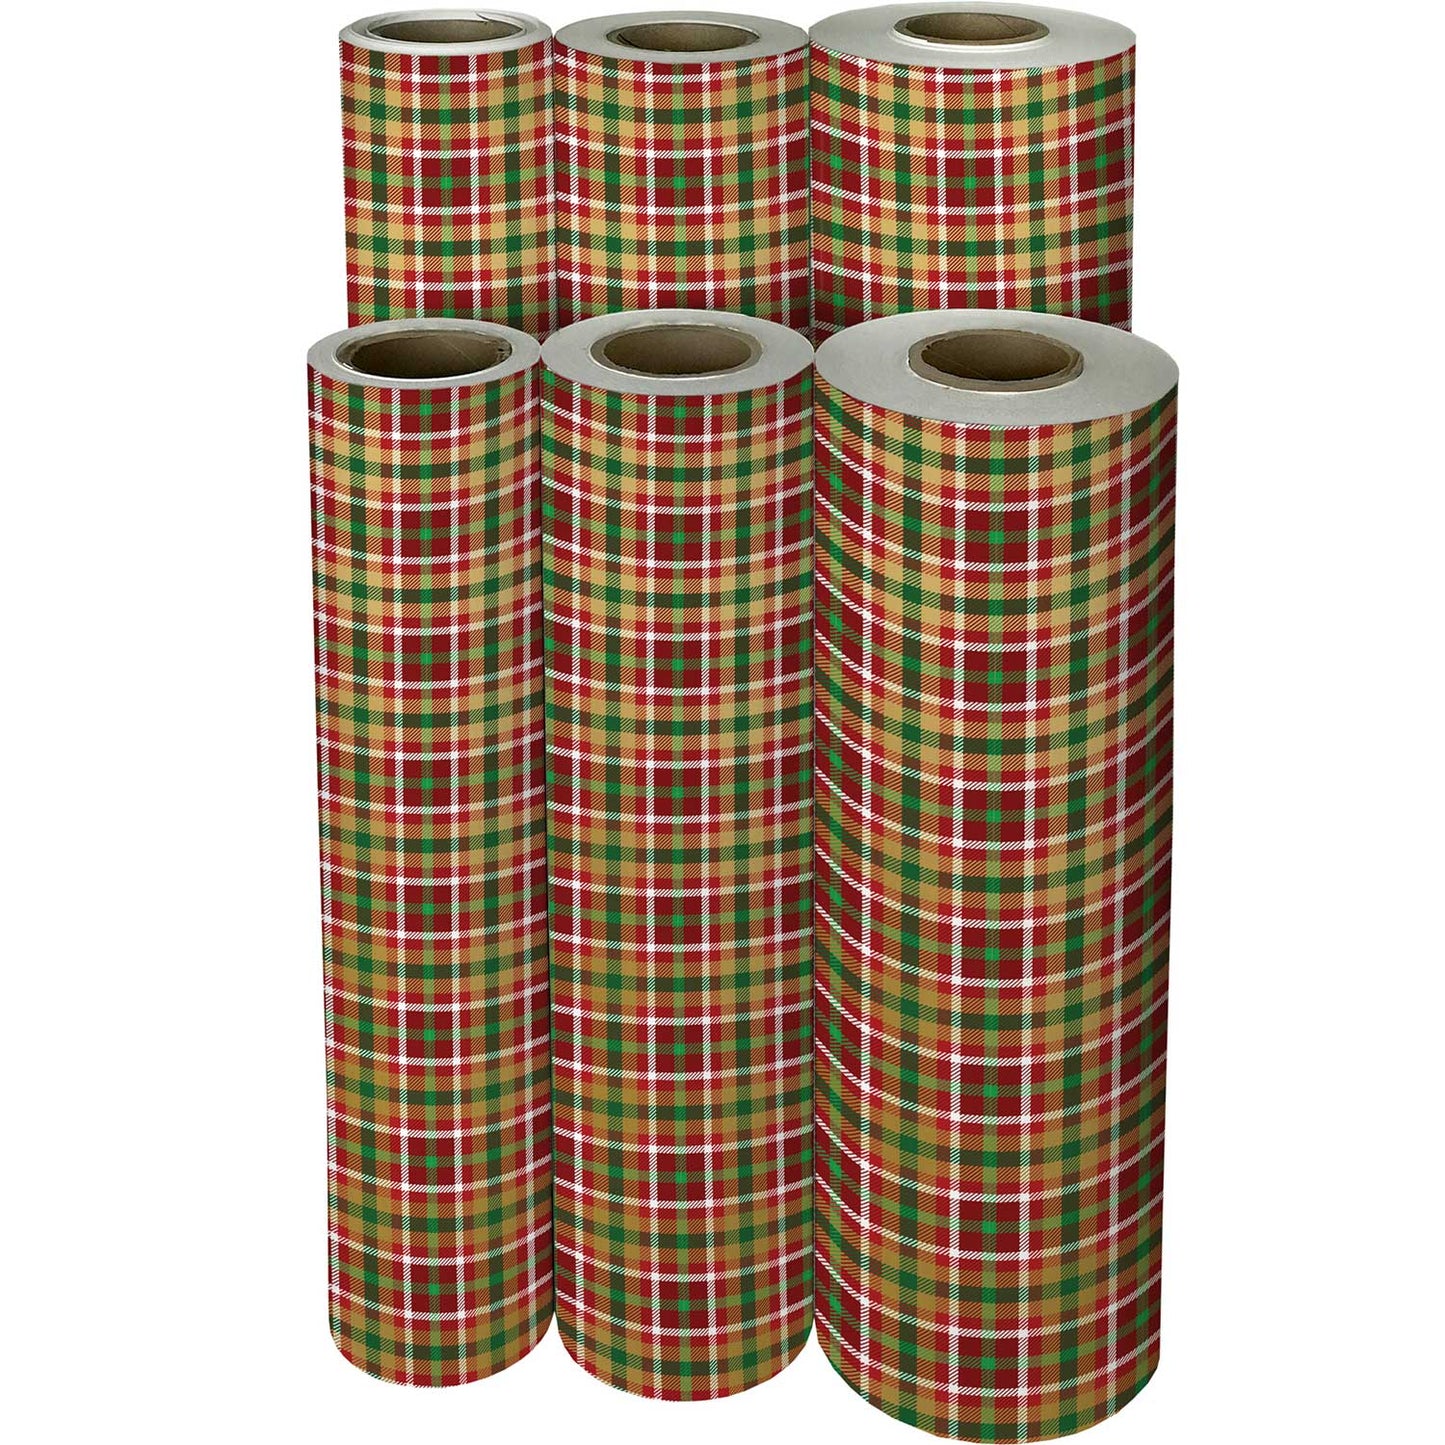 Plaid Christmas Gift Wrap by Present Paper